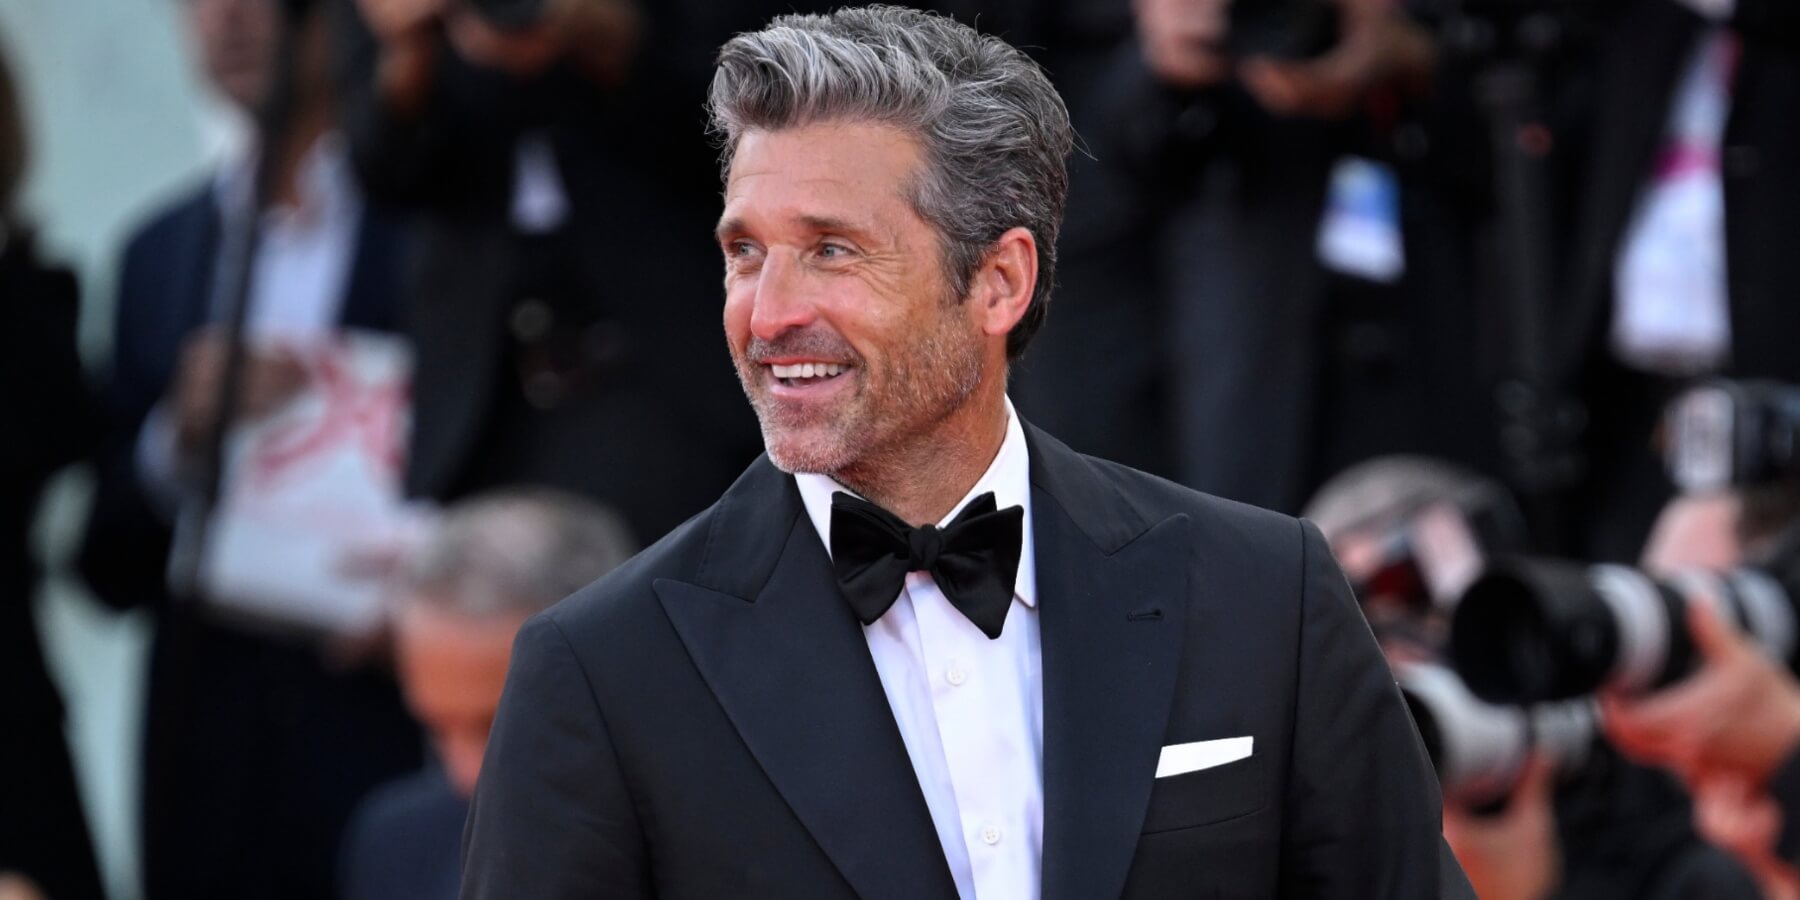 Patrick Dempsey promoting the movie 'Ferrari' at the Venice International Film Festival on August 31, 2023, in Venice, Italy.